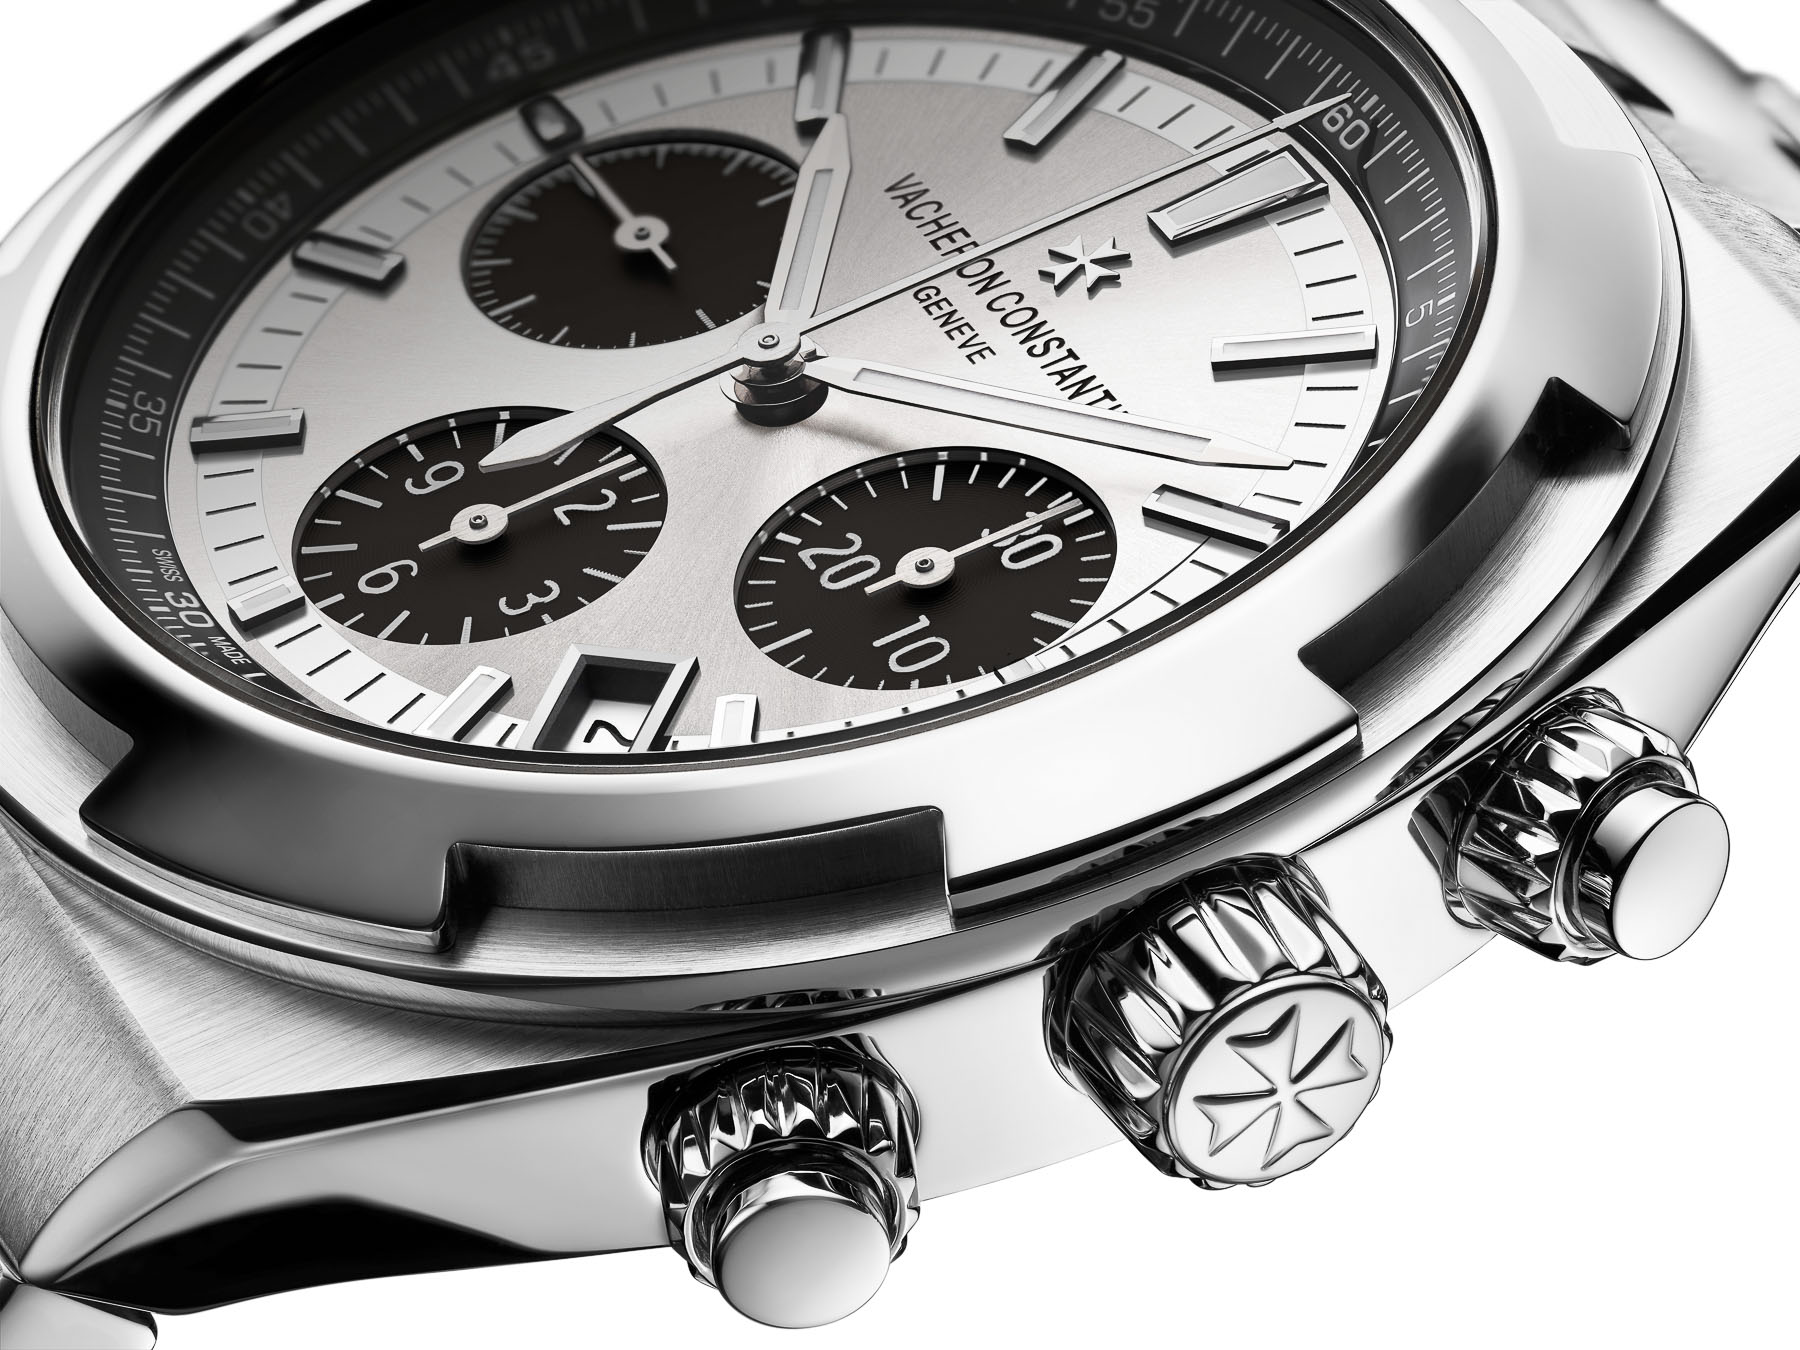 Vacheron Constantin Launches New Overseas Limited Editions